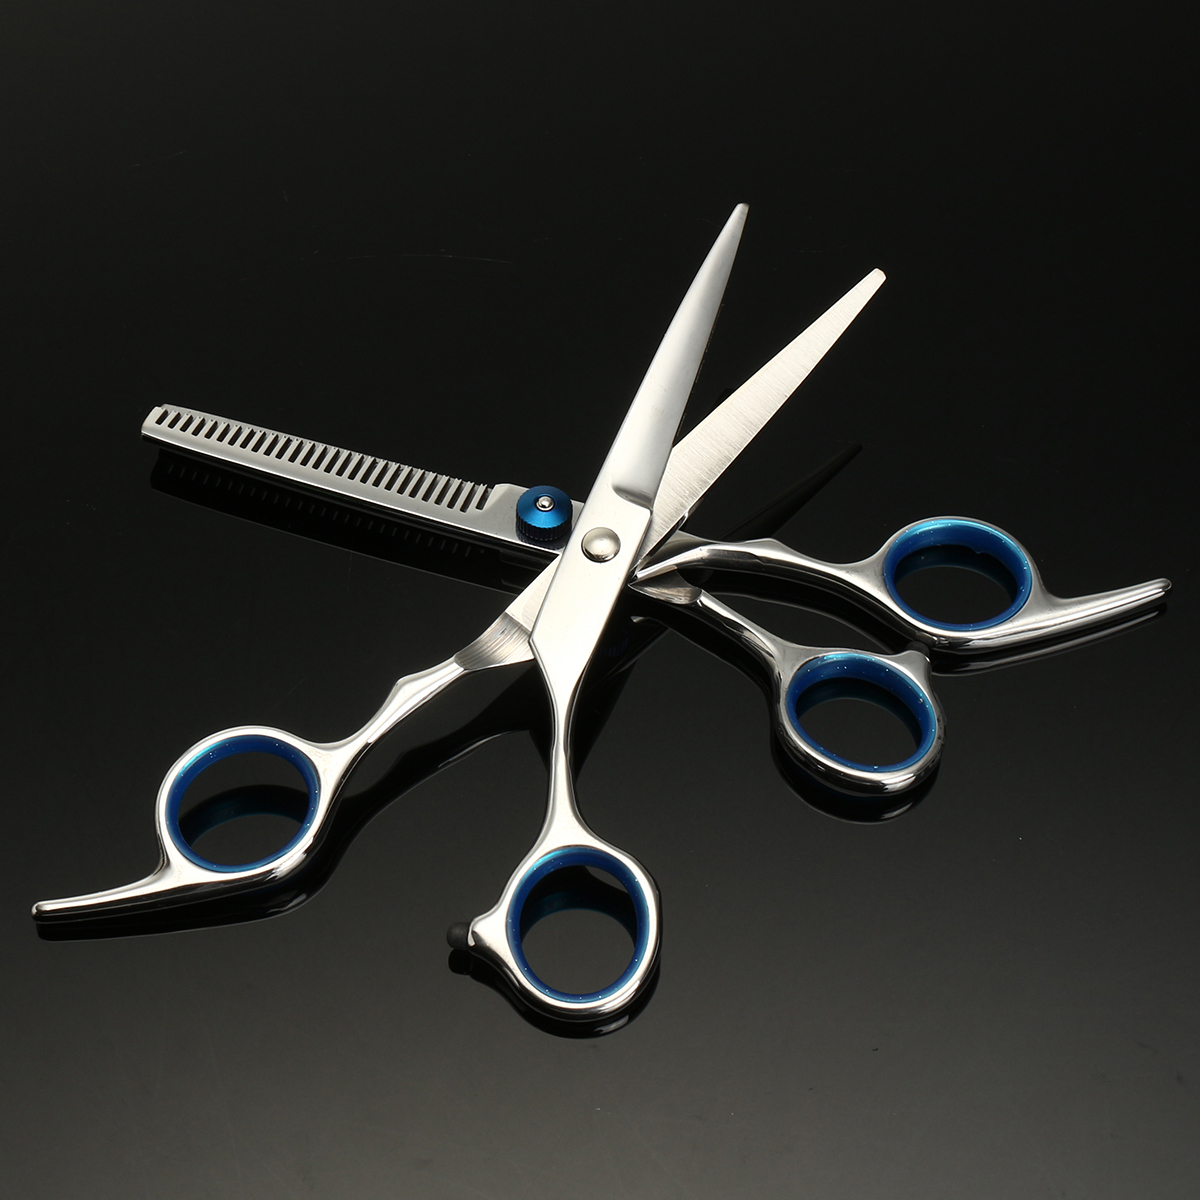 68-inch-Salon-Hair-Cutting-Scissors-Kit-Comb-Clips-Barber-Shears-Hairdressing-Hair-Styling-Tools-1259769